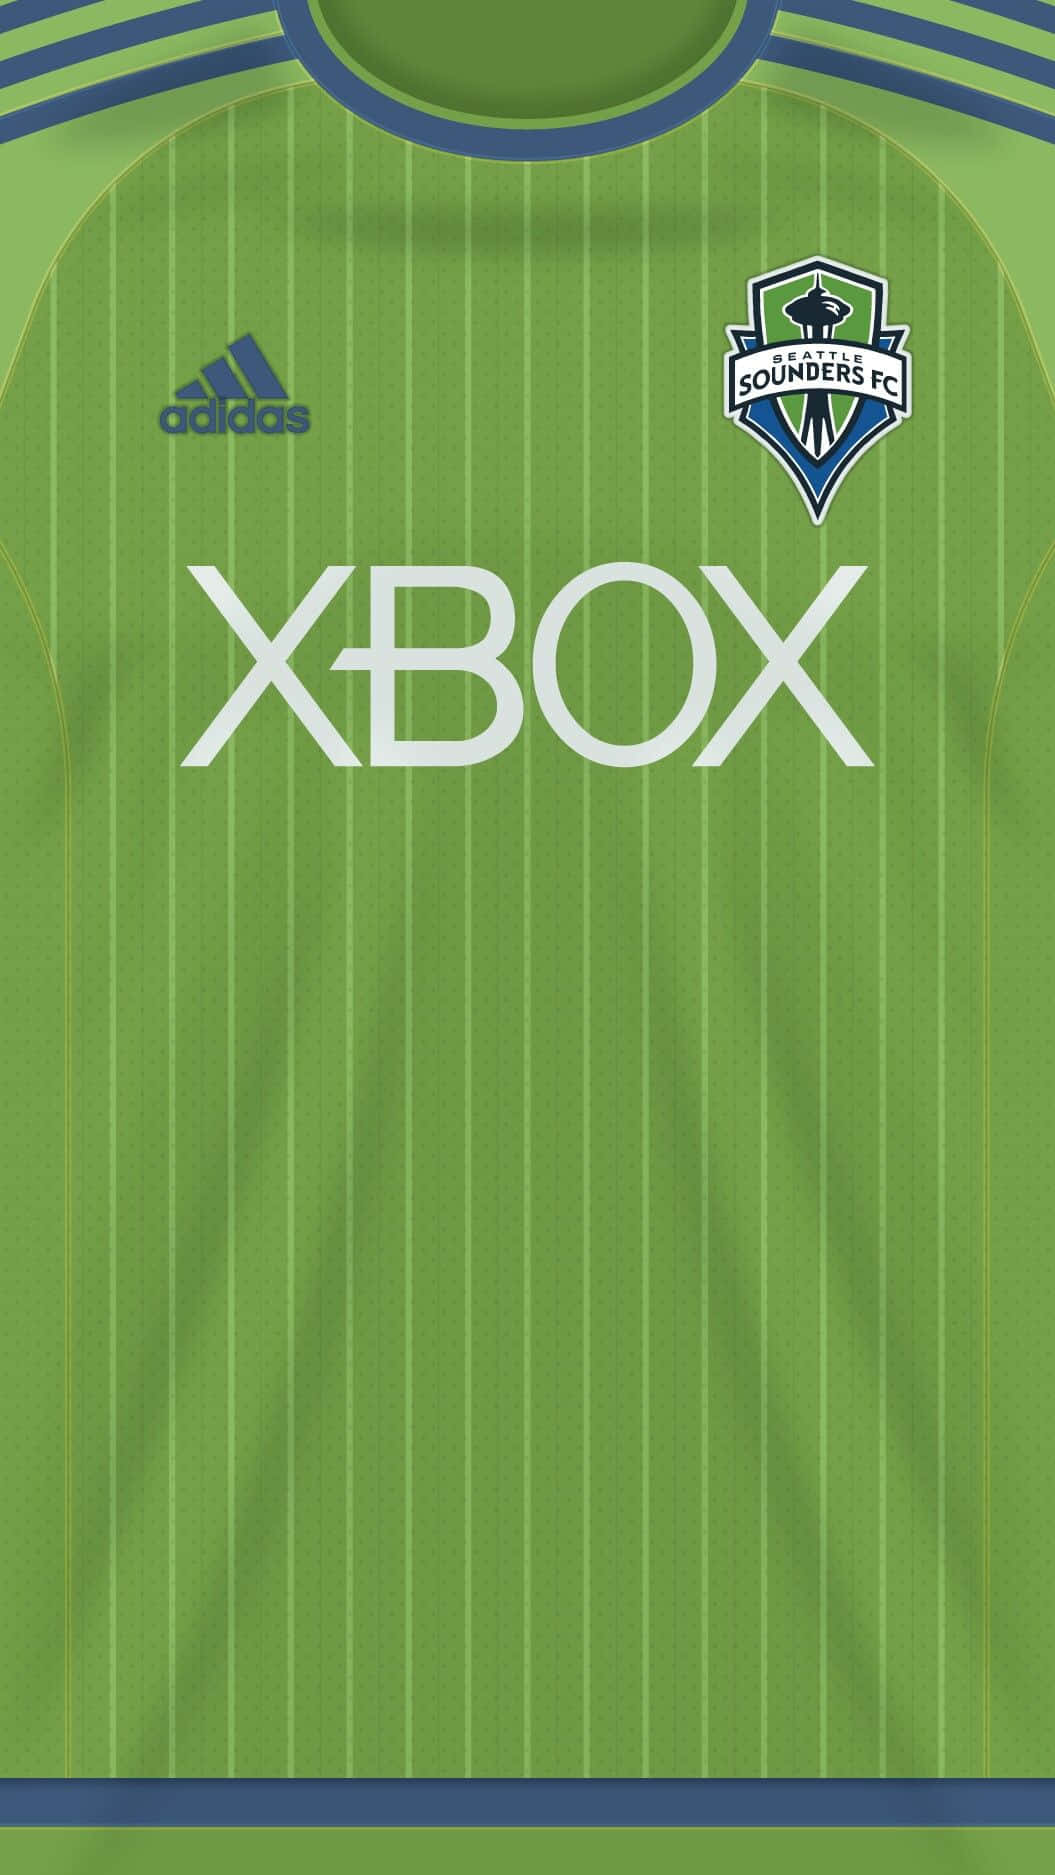 Seattle Sounders FC Adidas XBOX Jersey Wallpaper